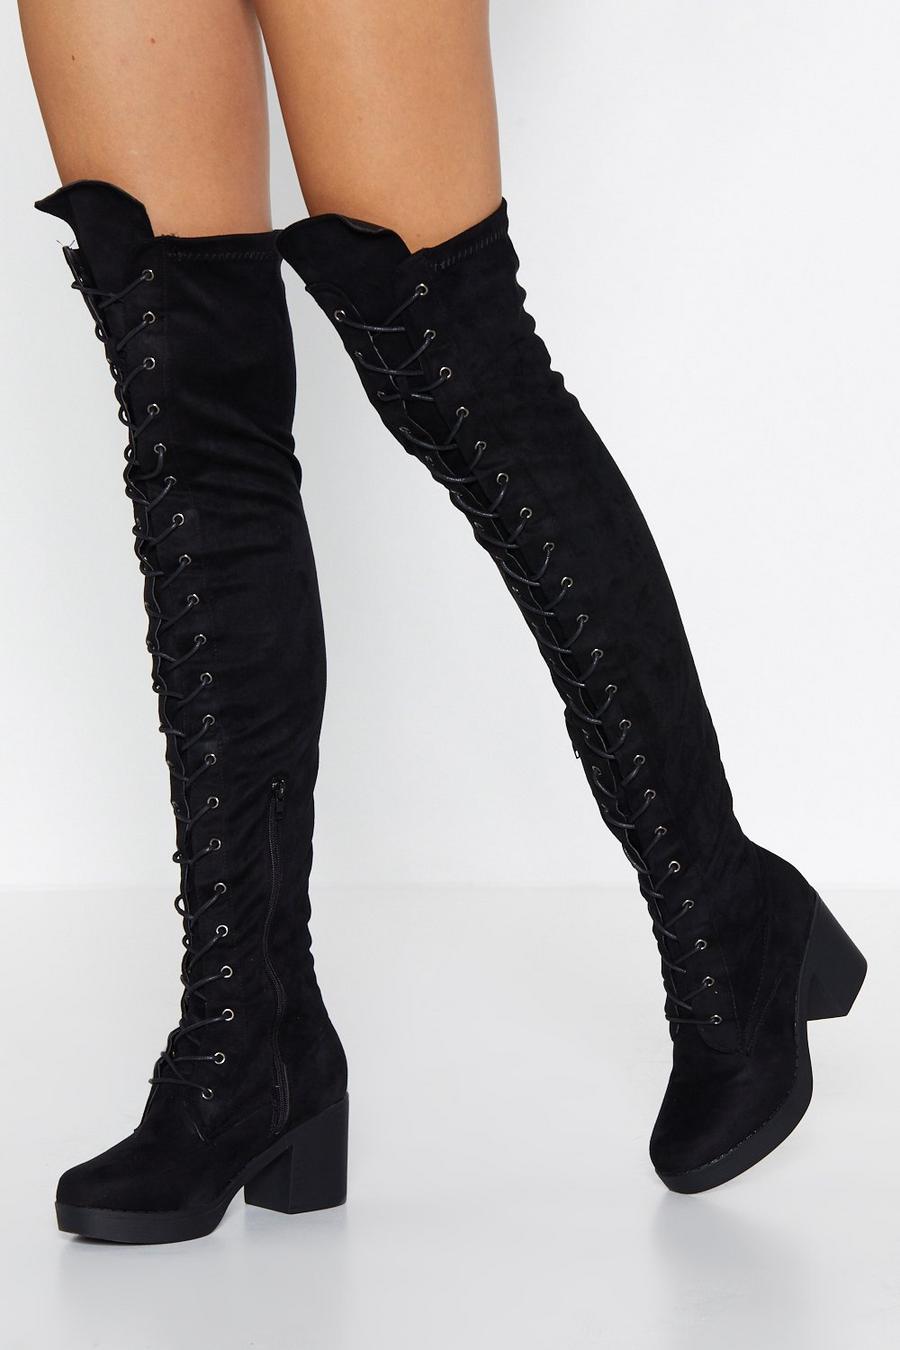 Women's Black Faux Suede Round Toe Block Heel Over The Knee Boots - Size 5